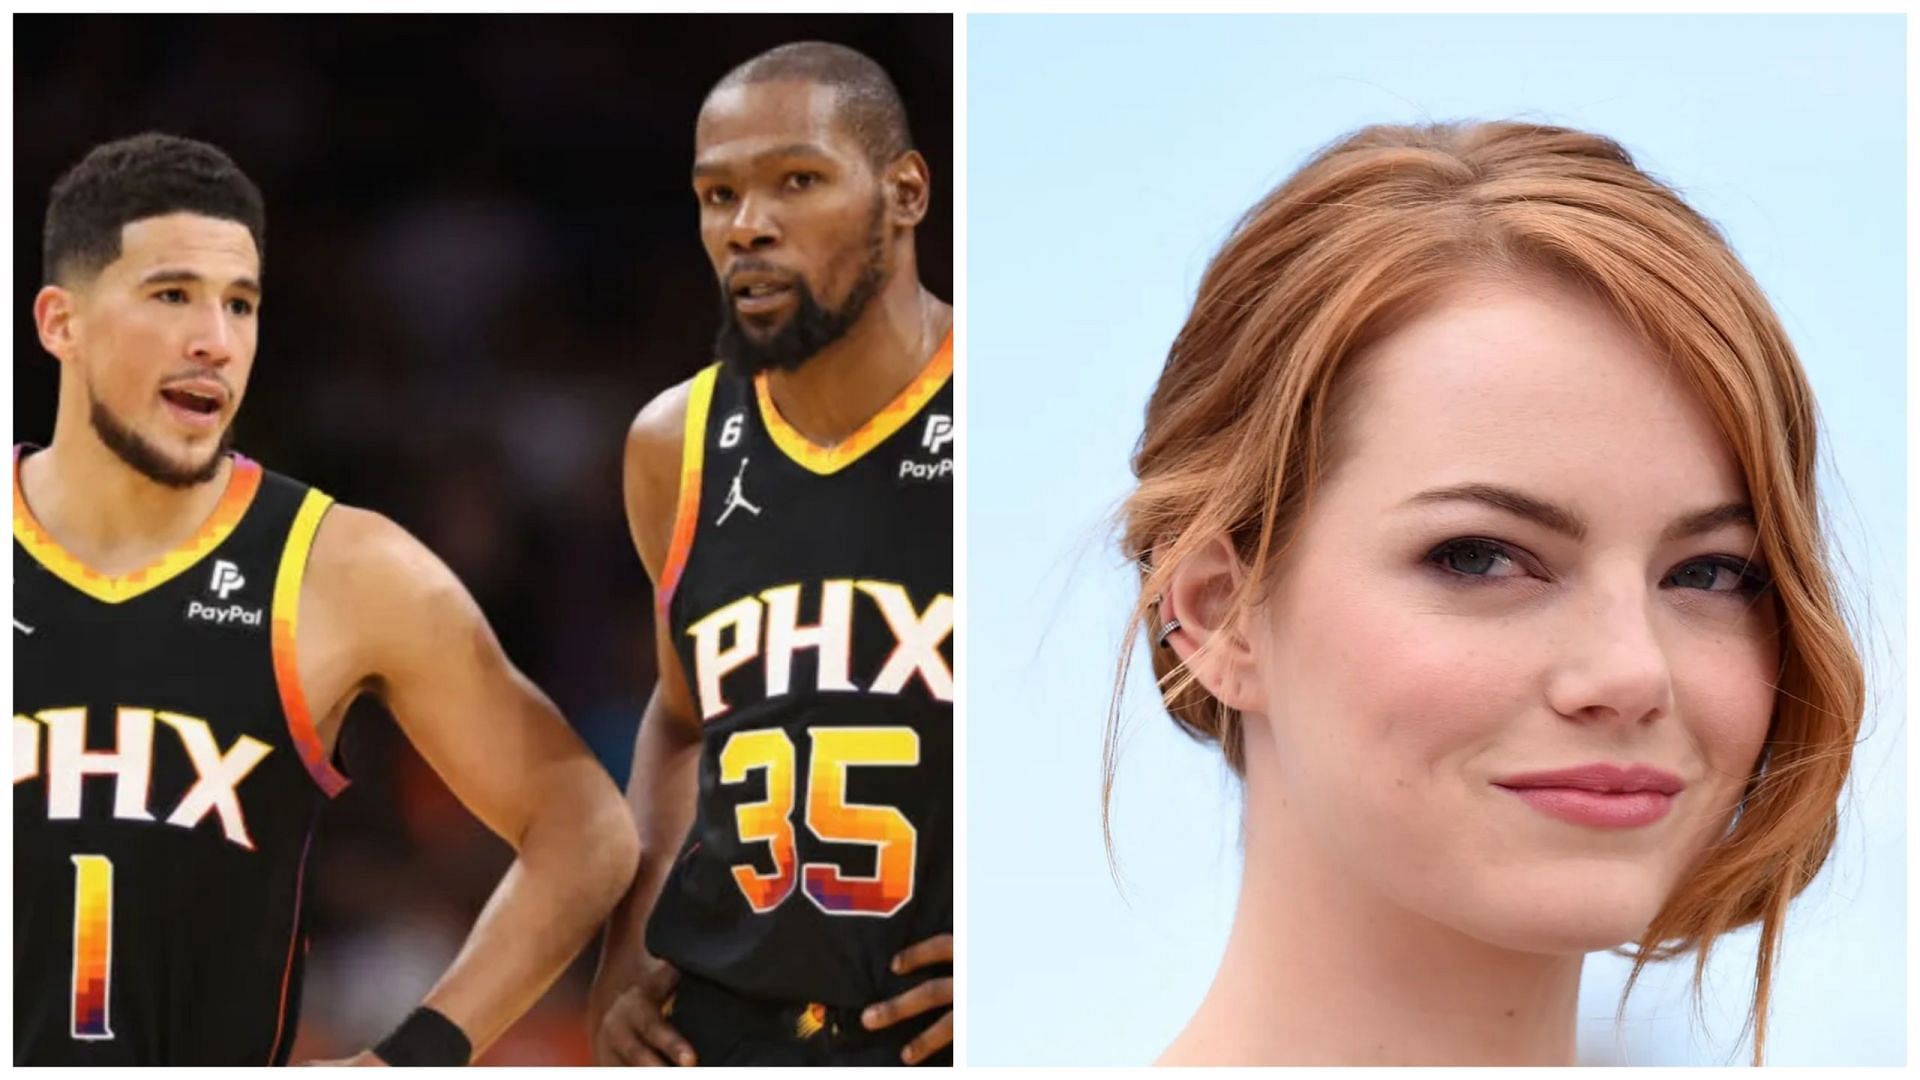 Kevin Durant and Devin Booker (left) reacted to famous actress Emma Stone (right) attending the Phoenix Suns - LA Lakers game at Crypto.com Arena